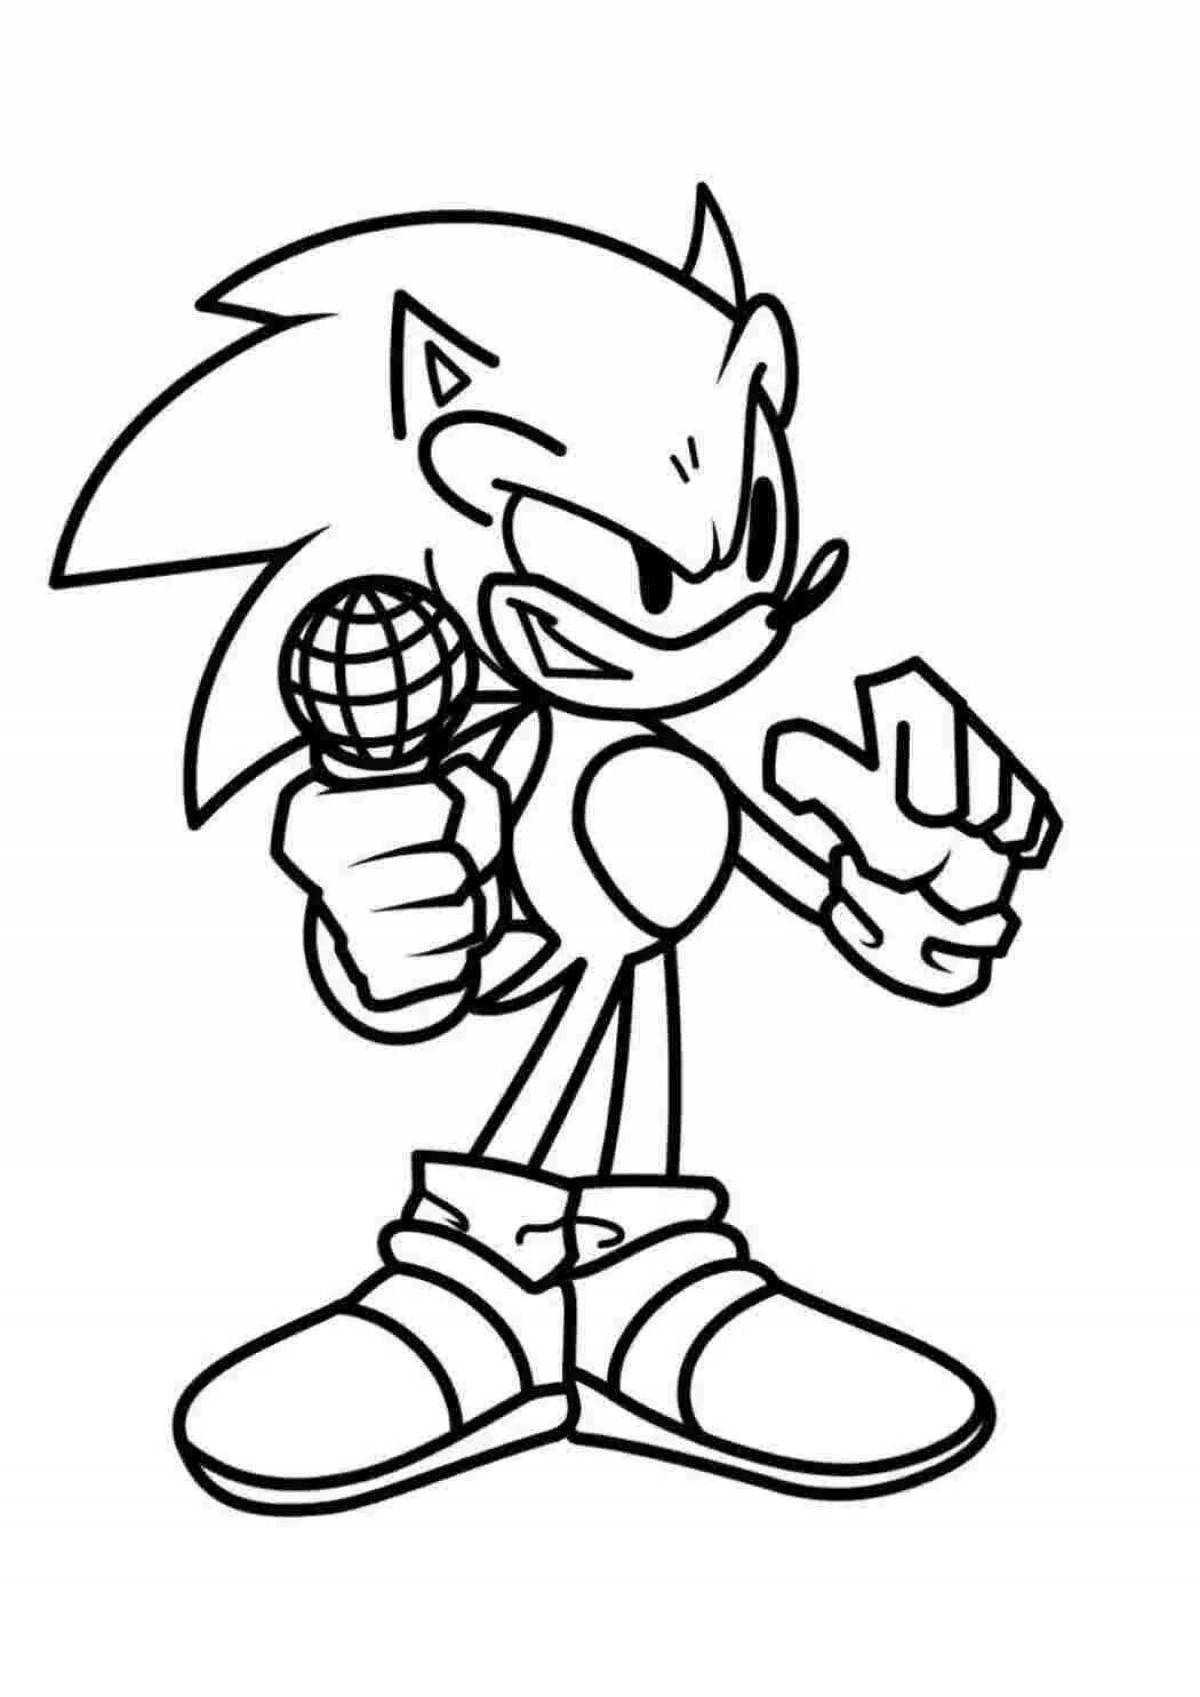 Sonic classic coloring book